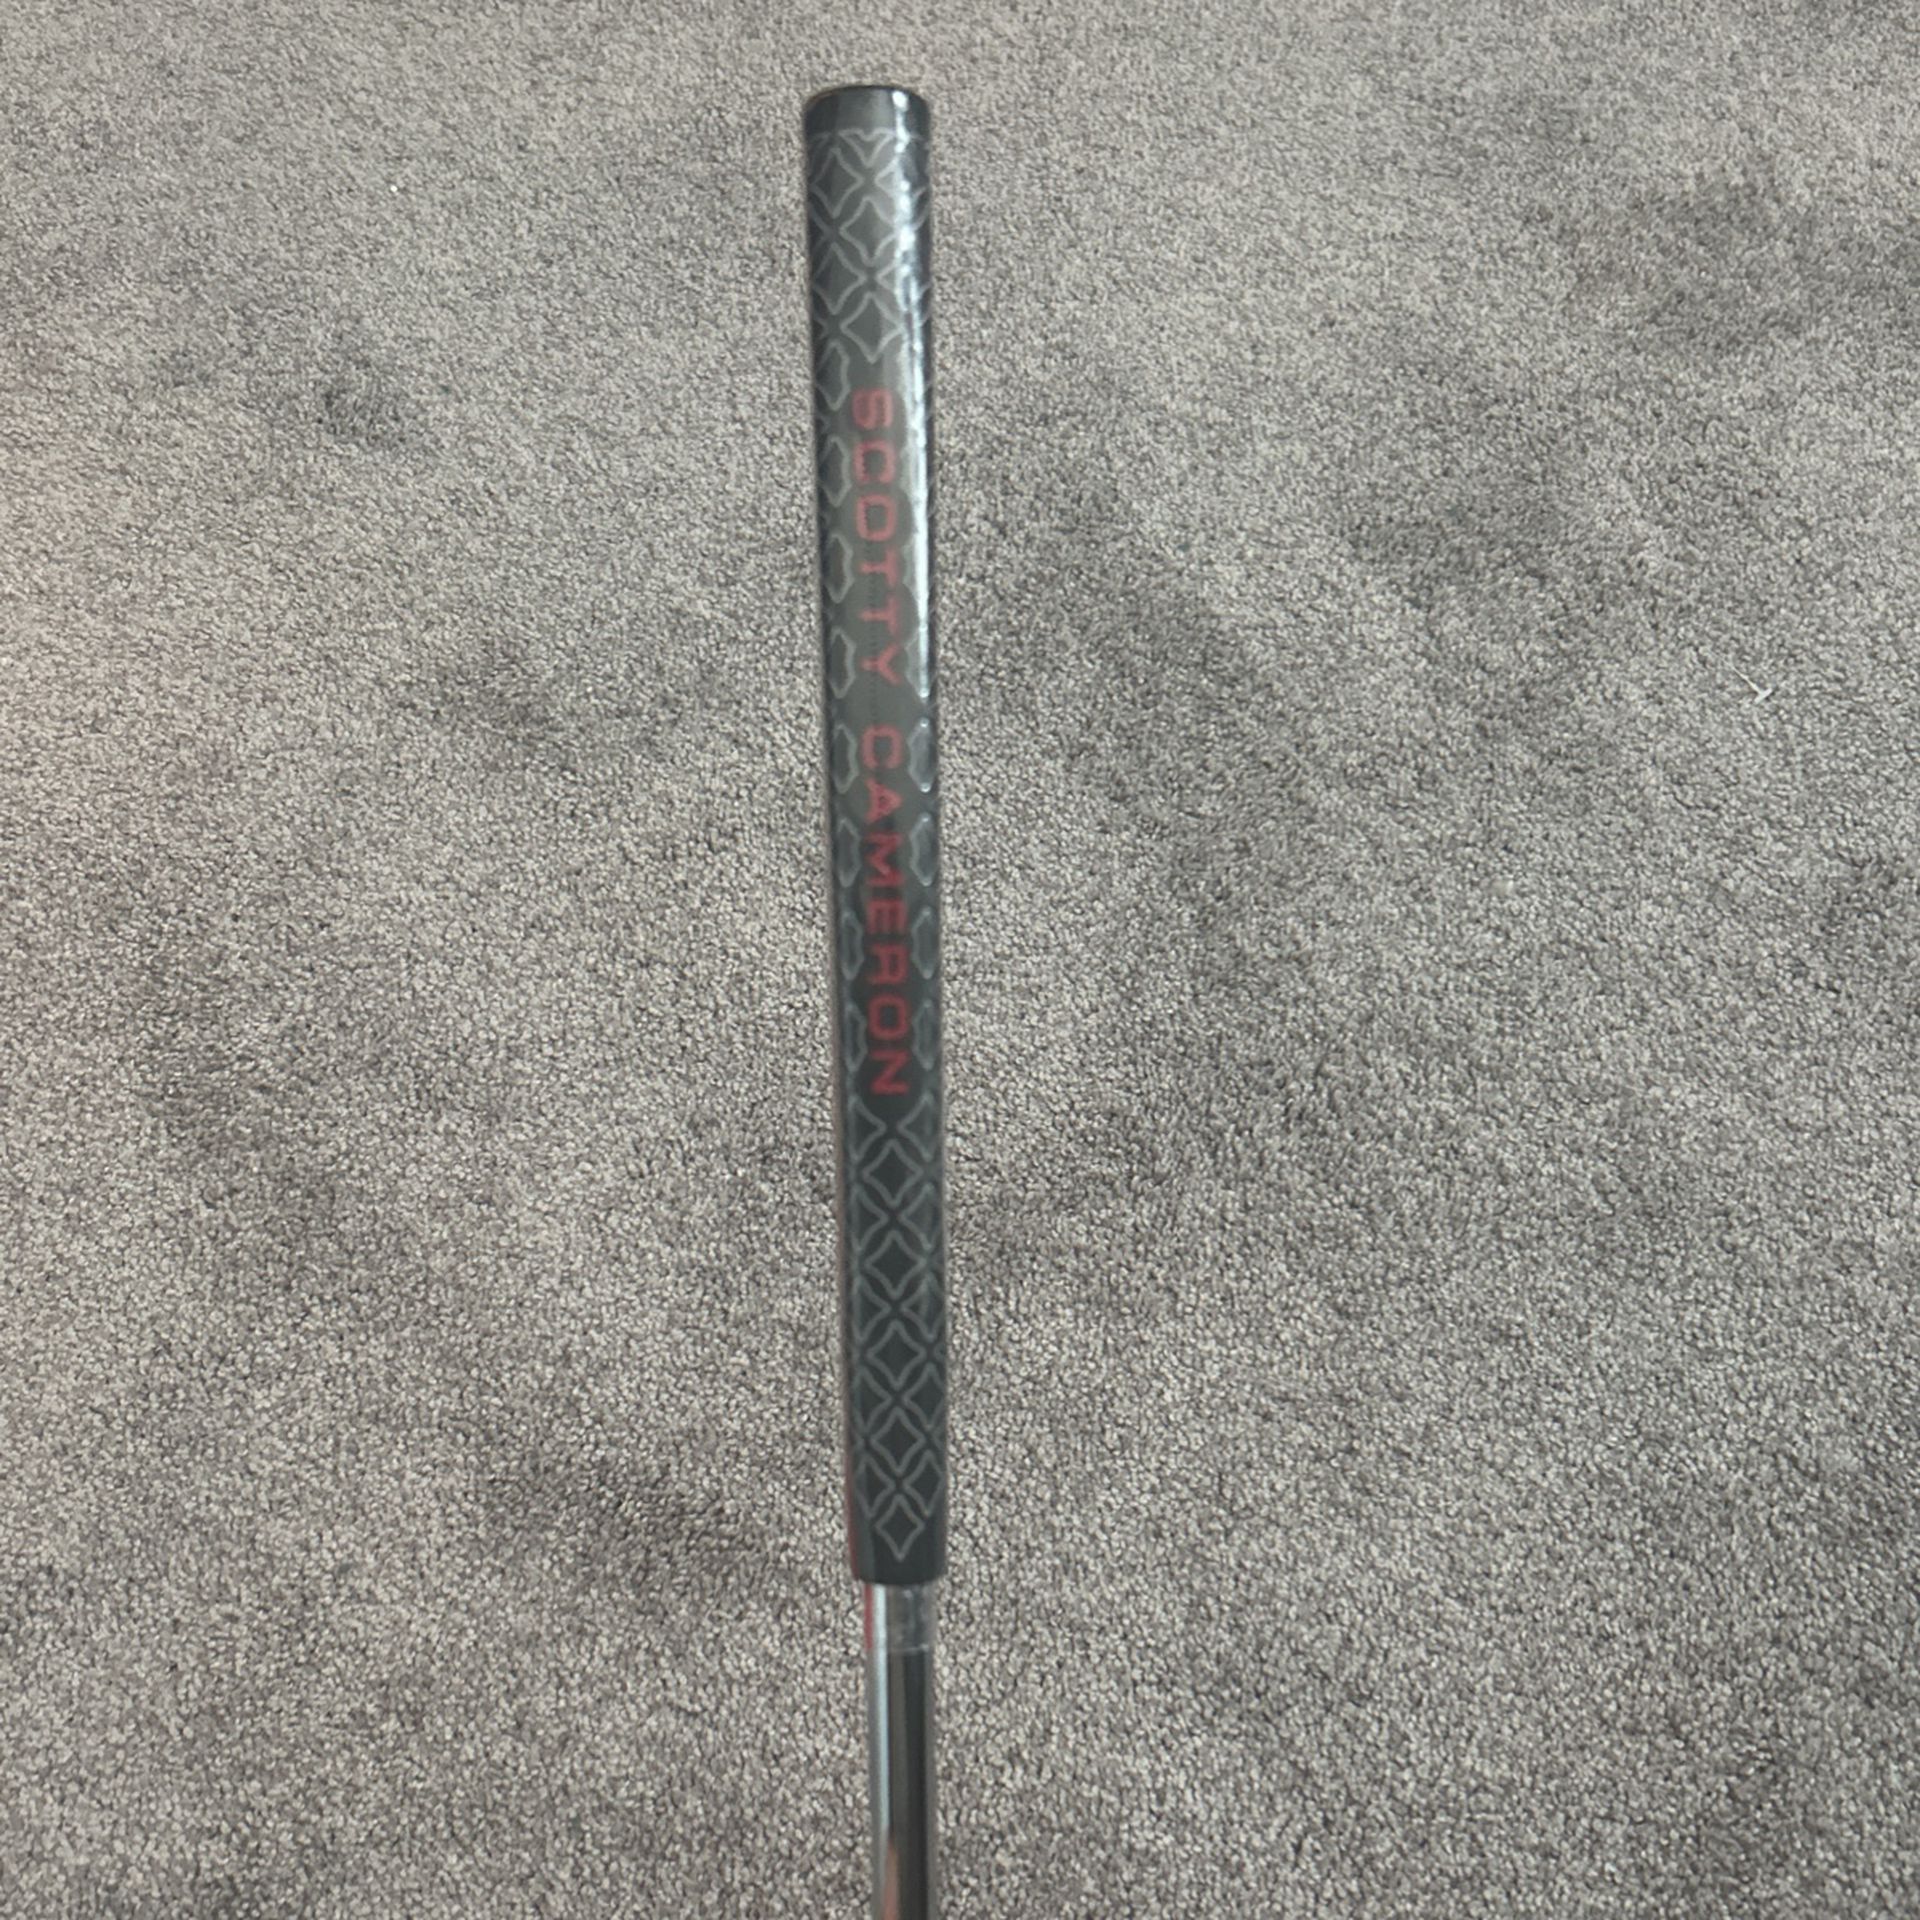 Brand New Still In Wrapper Scotty Cameron Pistolini Grip And Shaft